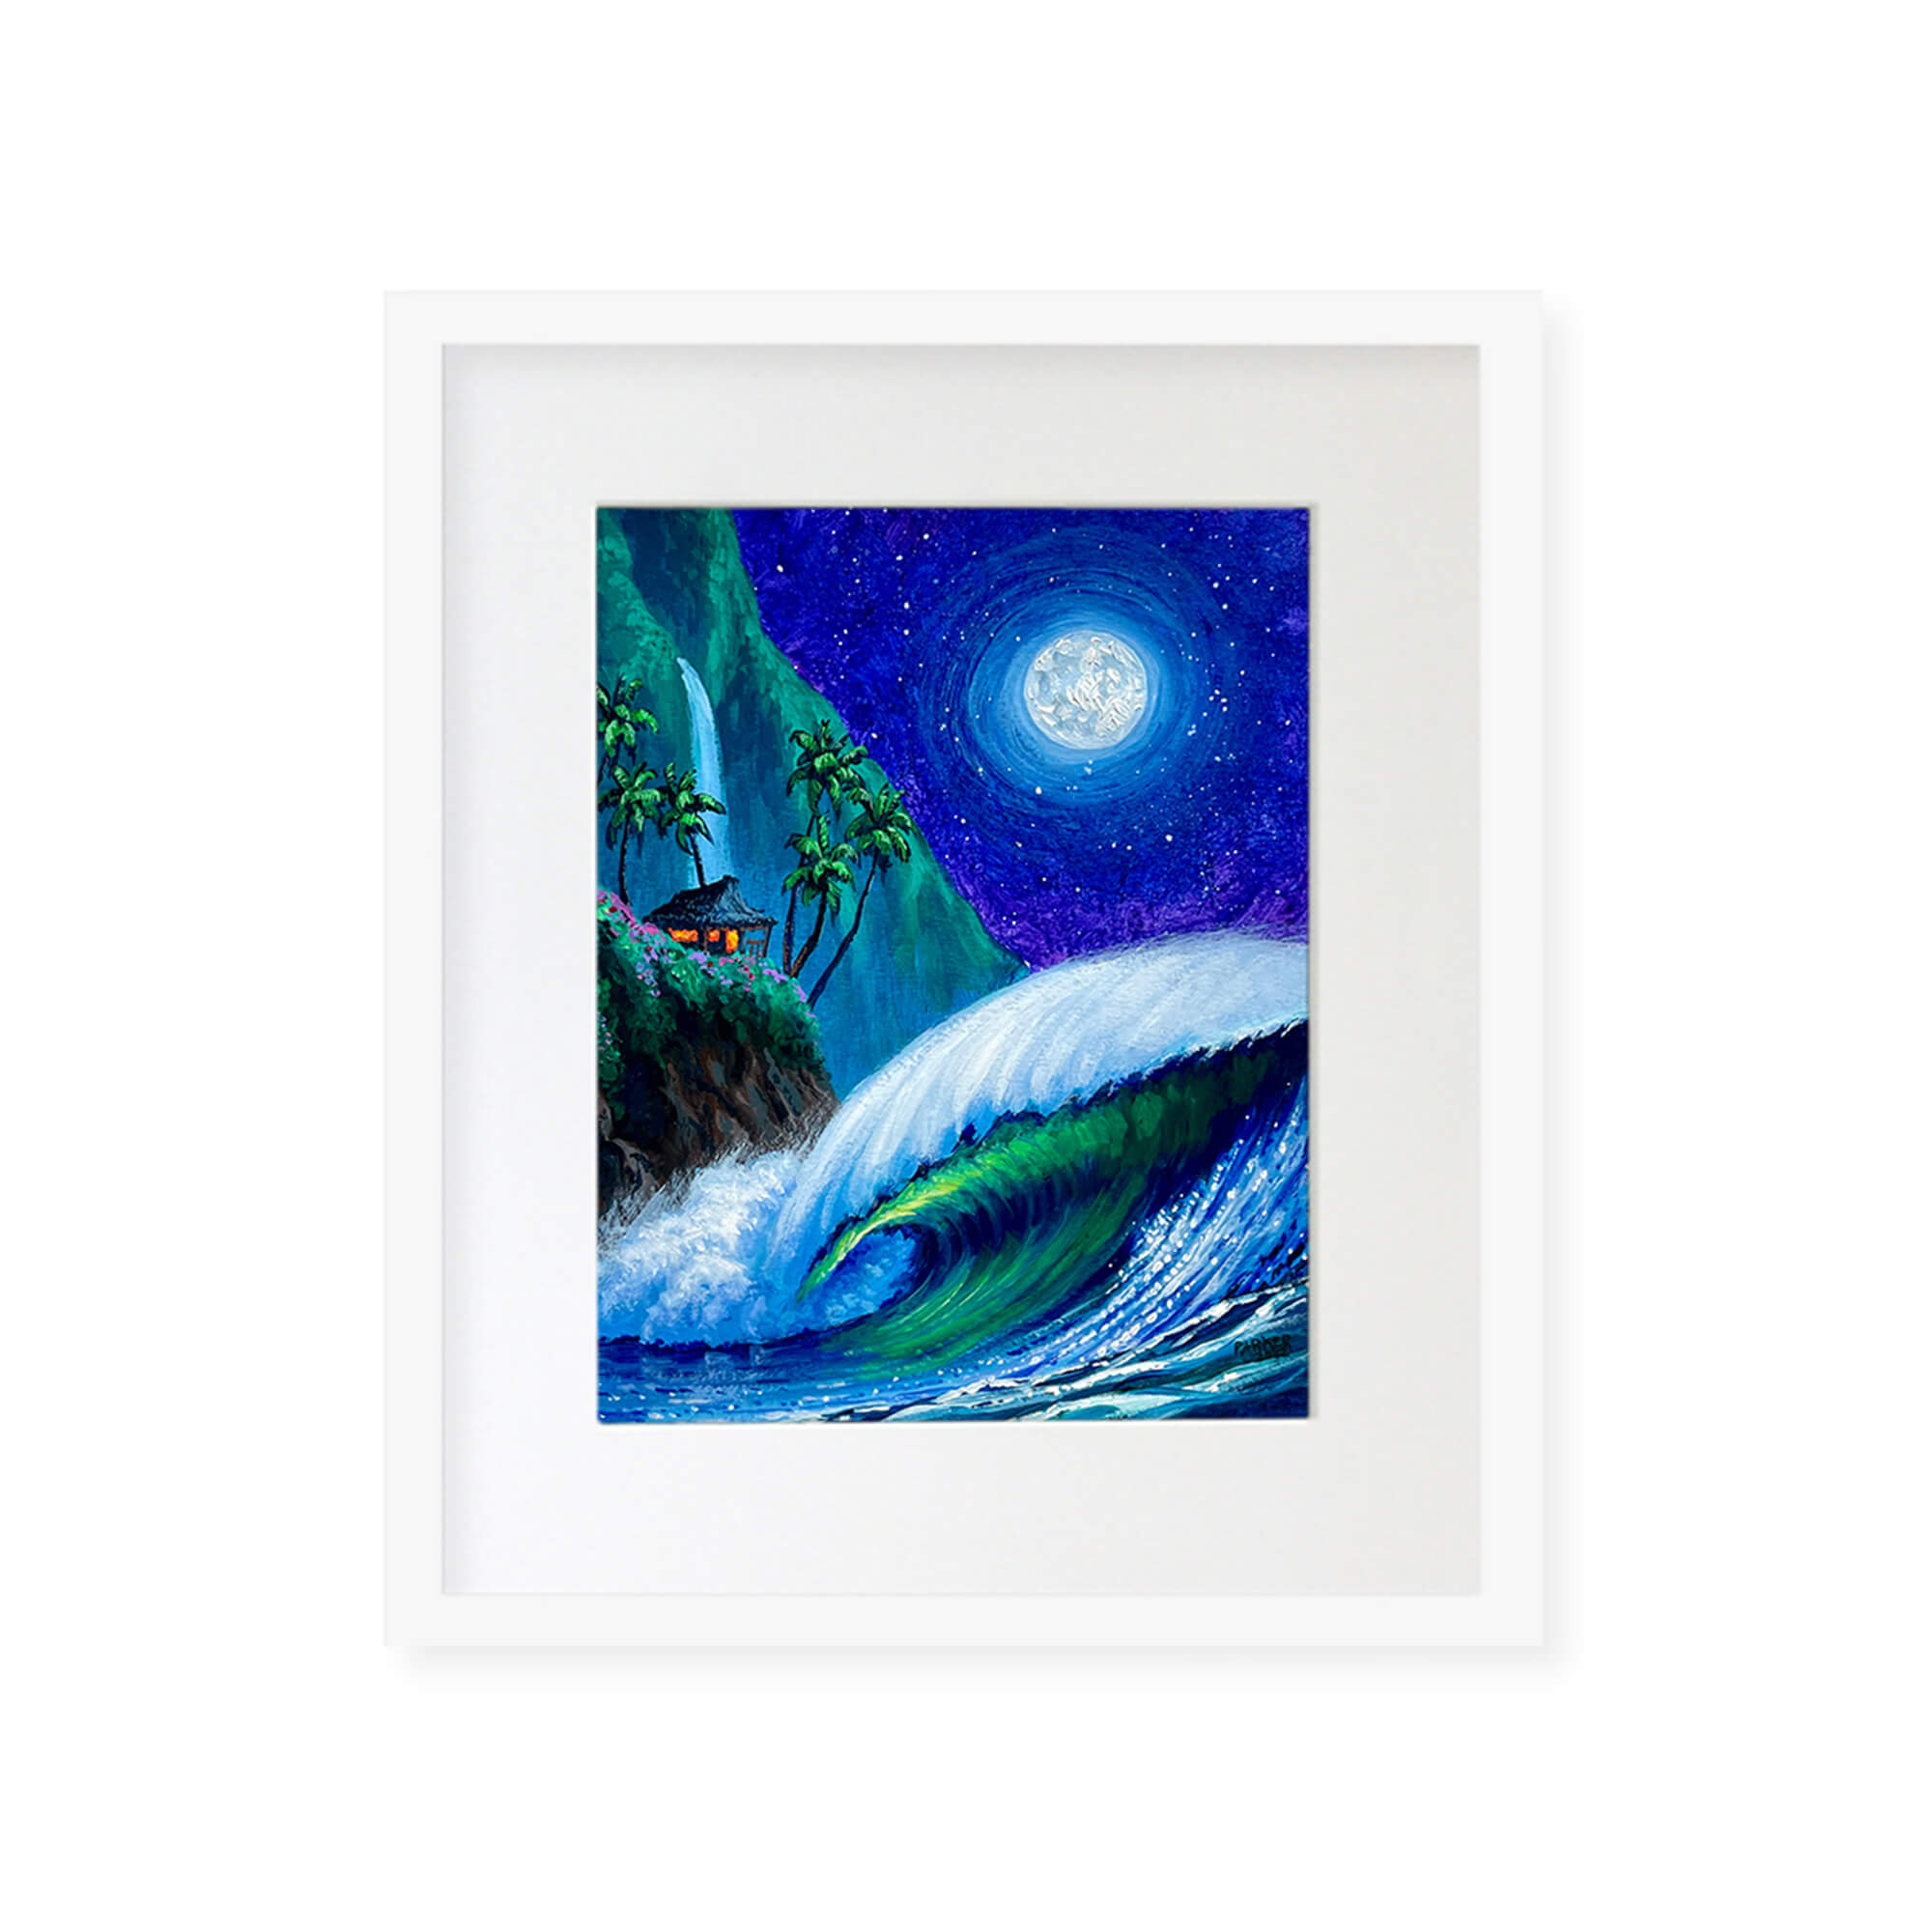 A framed original artwork features a beautiful seascape with a crashing wave, a brilliant blue moon, and an idyllic hut on a distant island by Hawaii artist Patrick Parker